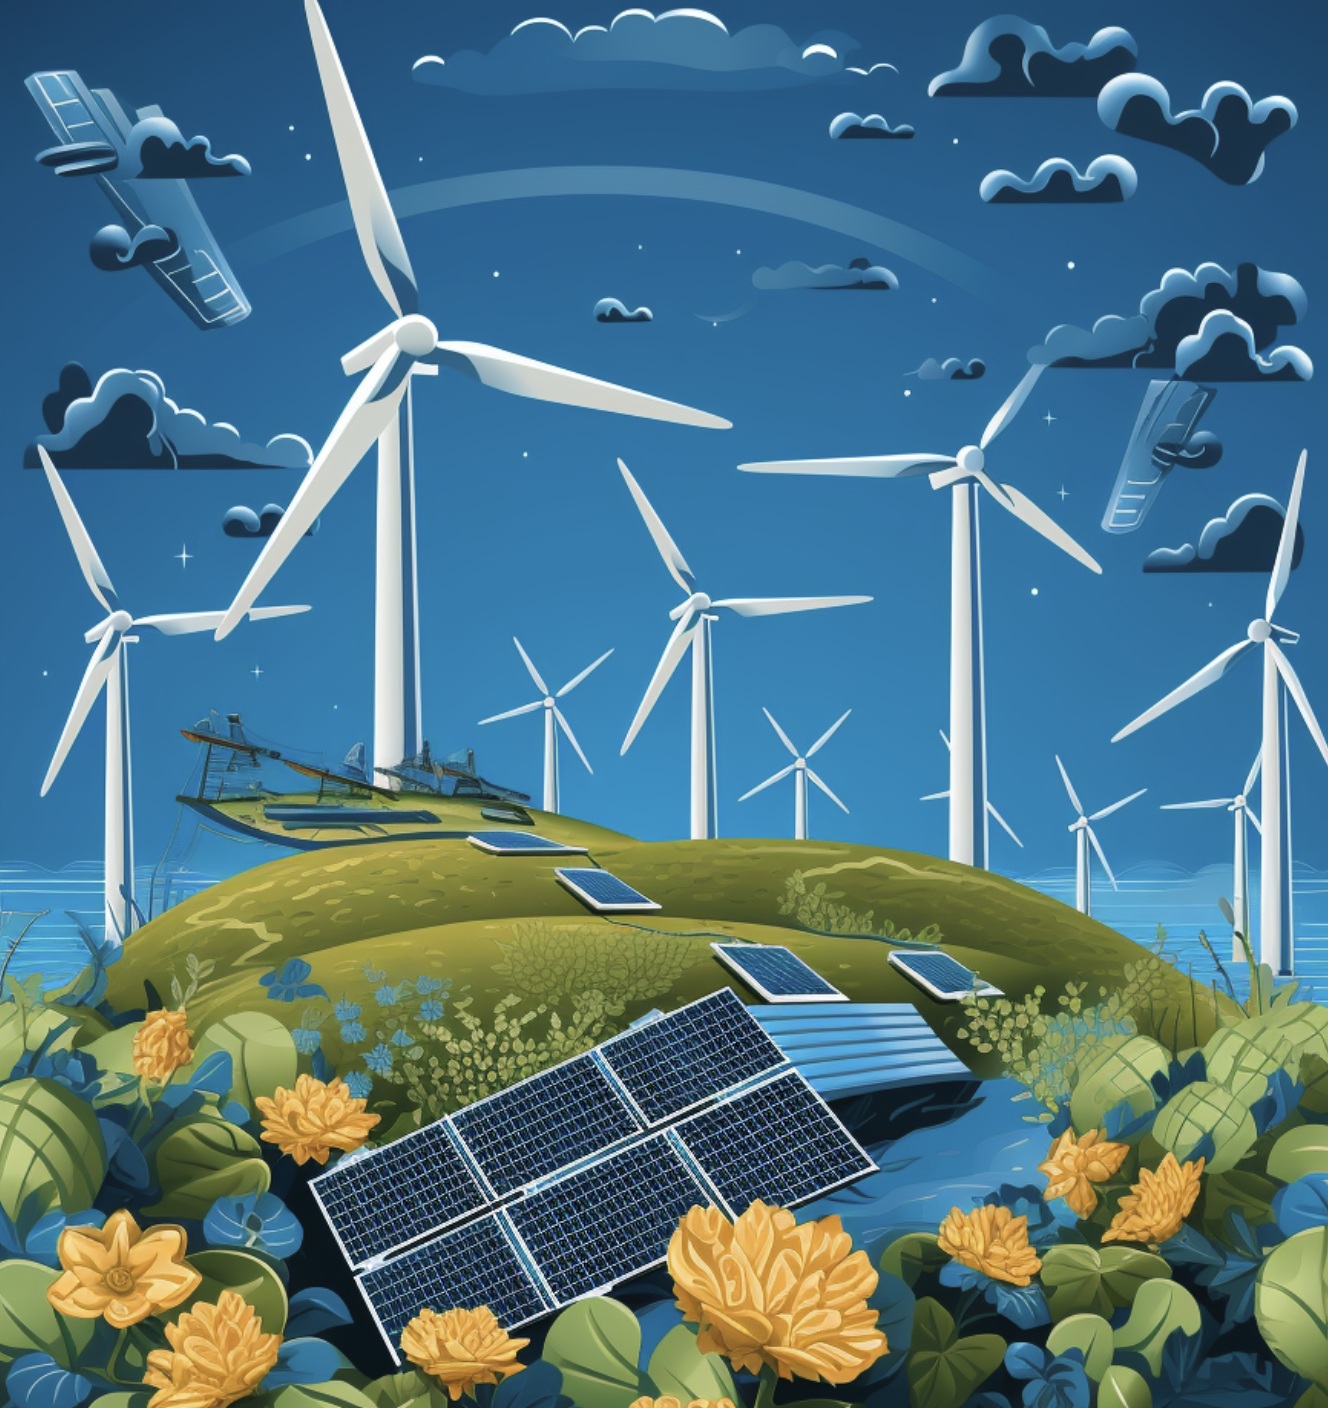 An illustration showcasing renewable energy sources like solar panels and wind turbines, with dollar signs or tax credit symbols. 